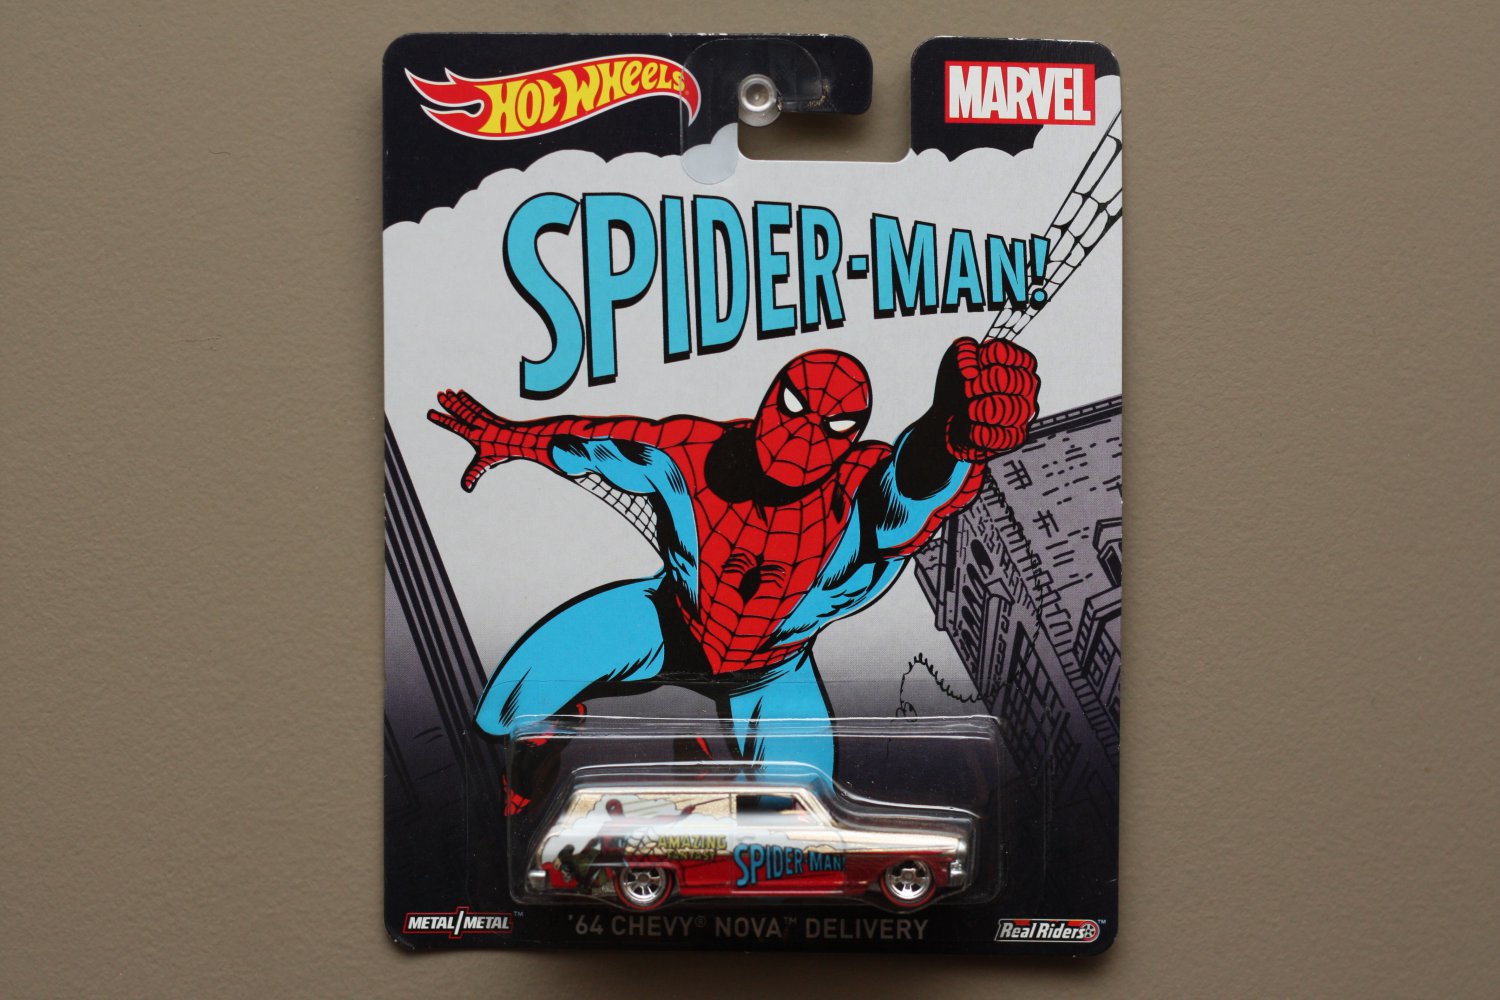 Hot Wheels 2015 Pop Culture Marvel '64 Chevy Nova Delivery (The Amazing Spider-Man)